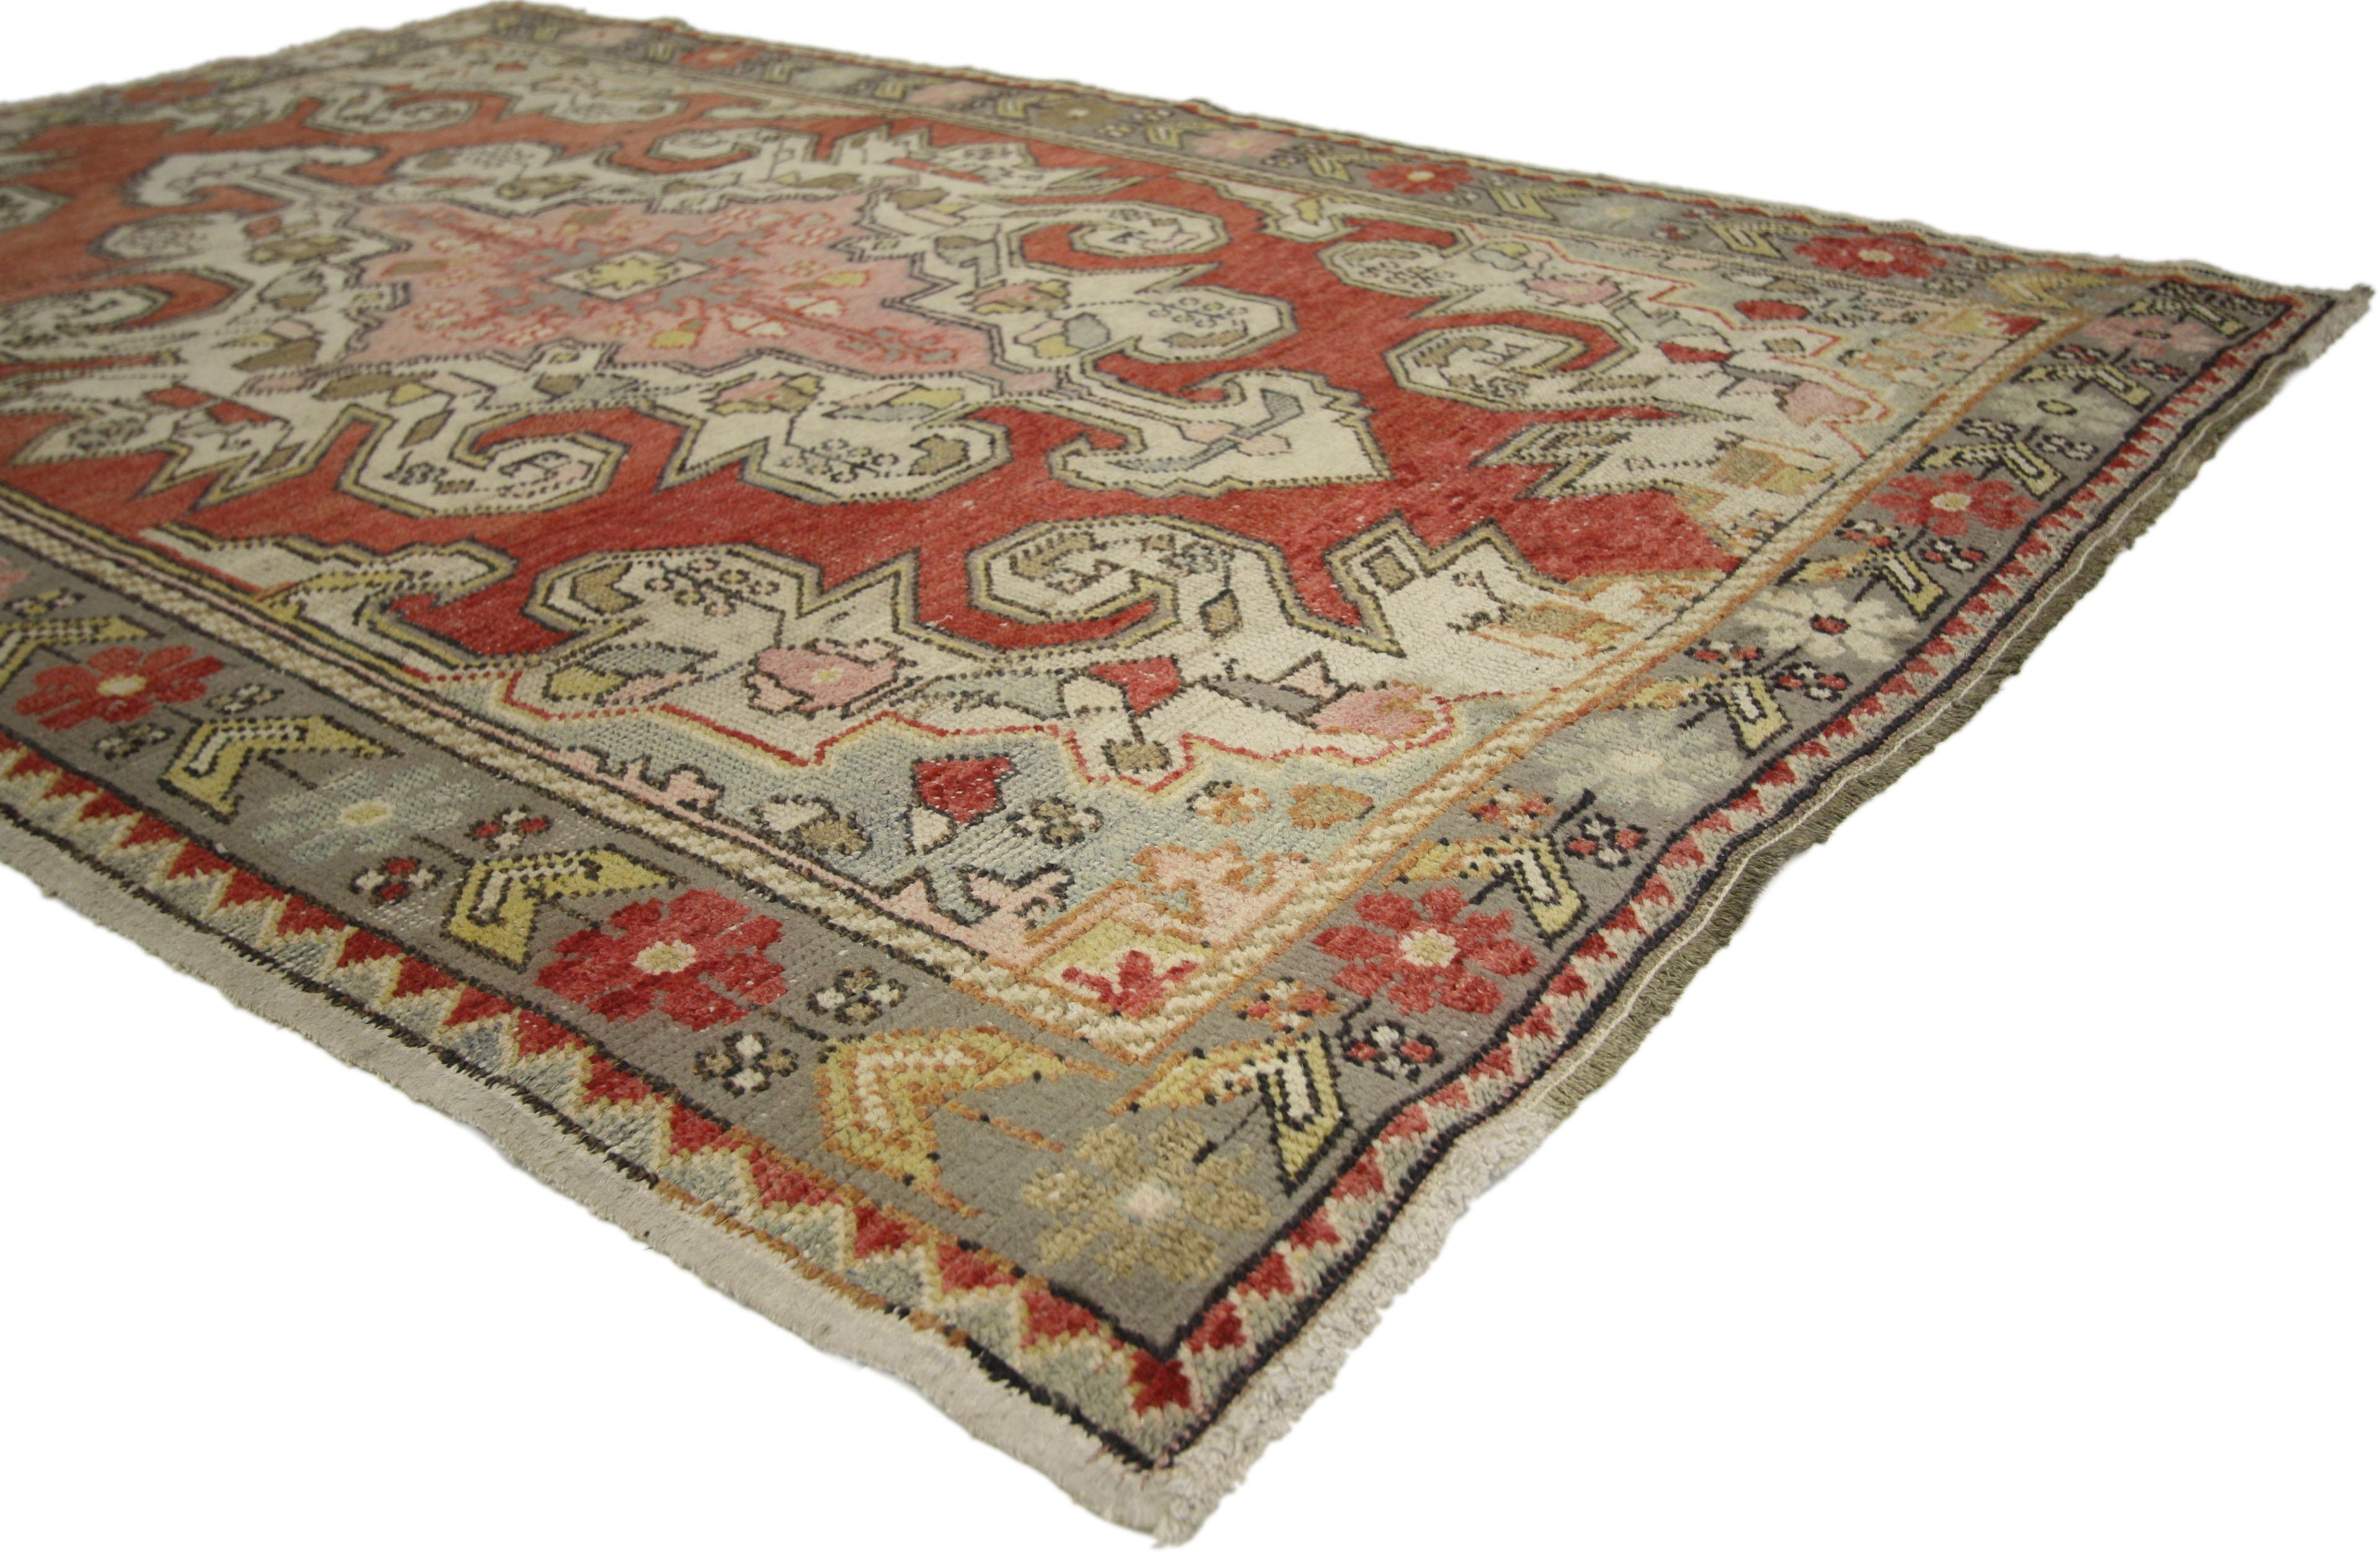 50057 A vintage Turkish Oushak accent rug in all-over floral design. This opulent vintage Turkish Oushak rug features an angular floral design similar to the Persian styles. A pink medallion is framed in an ornate cream and bordered in sage on an